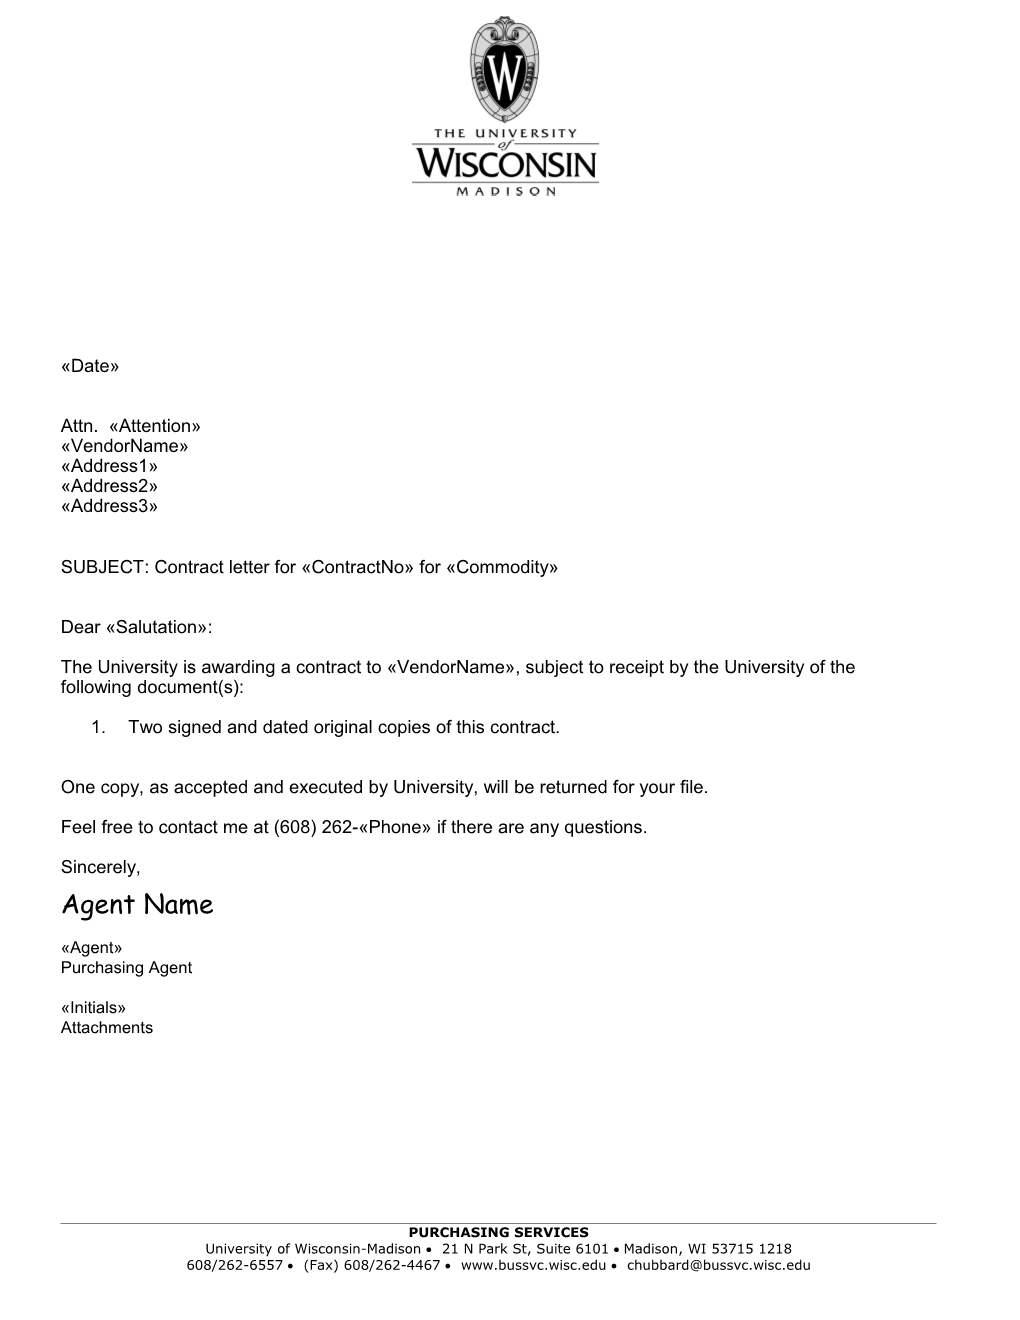 SUBJECT: Contract Letter for Contractno for Commodity